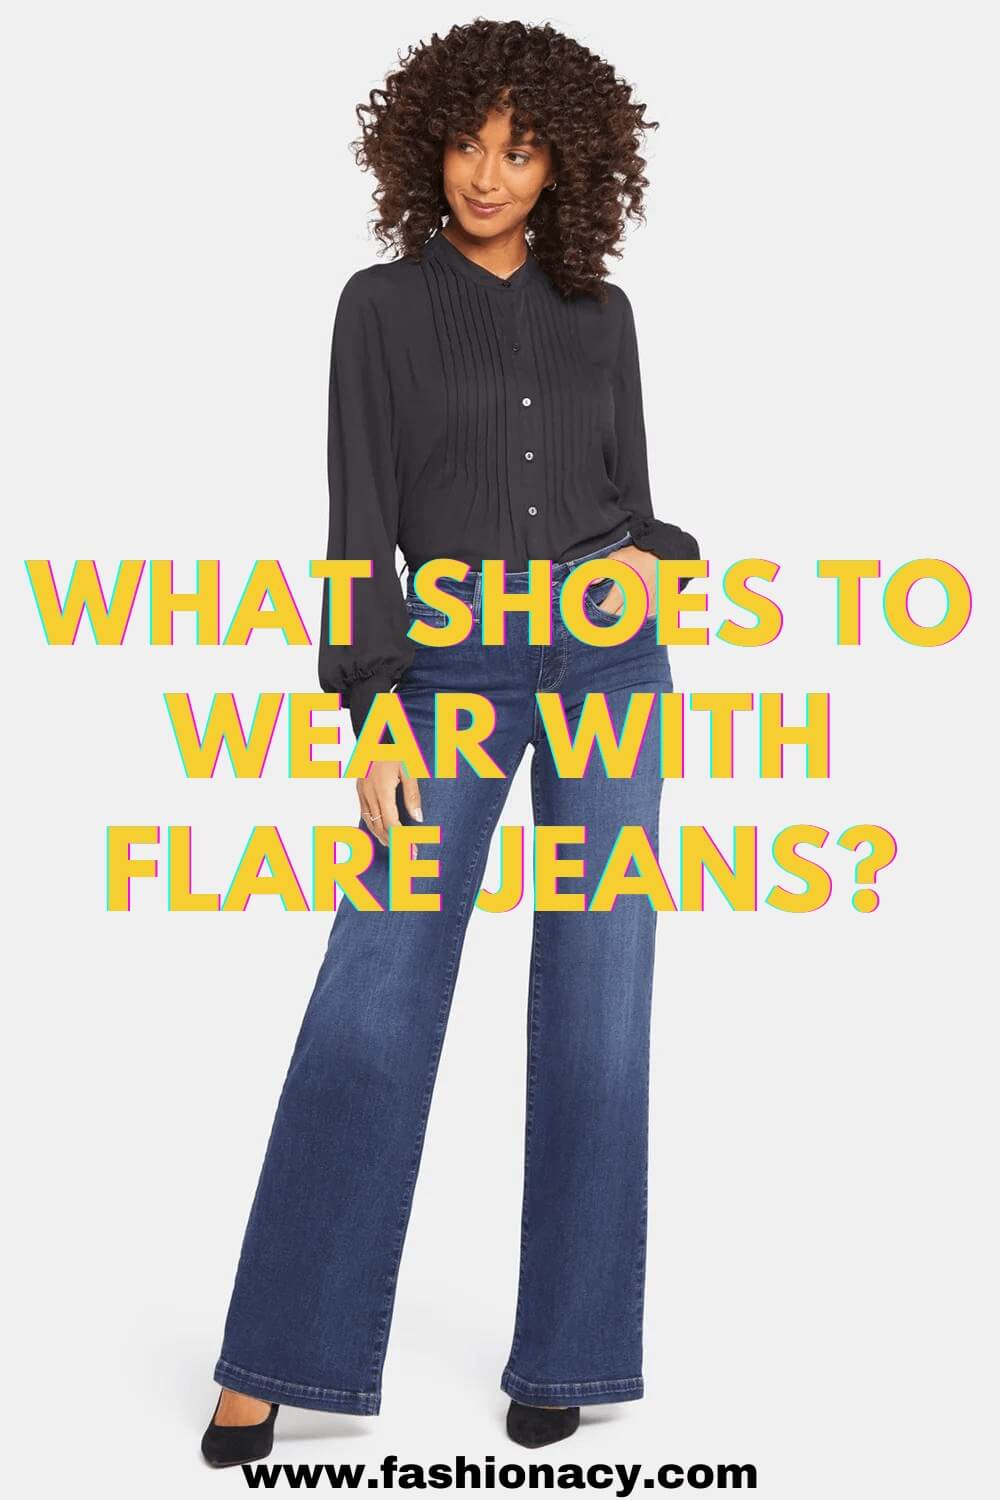 What Shoes to Wear With Flare Jeans?